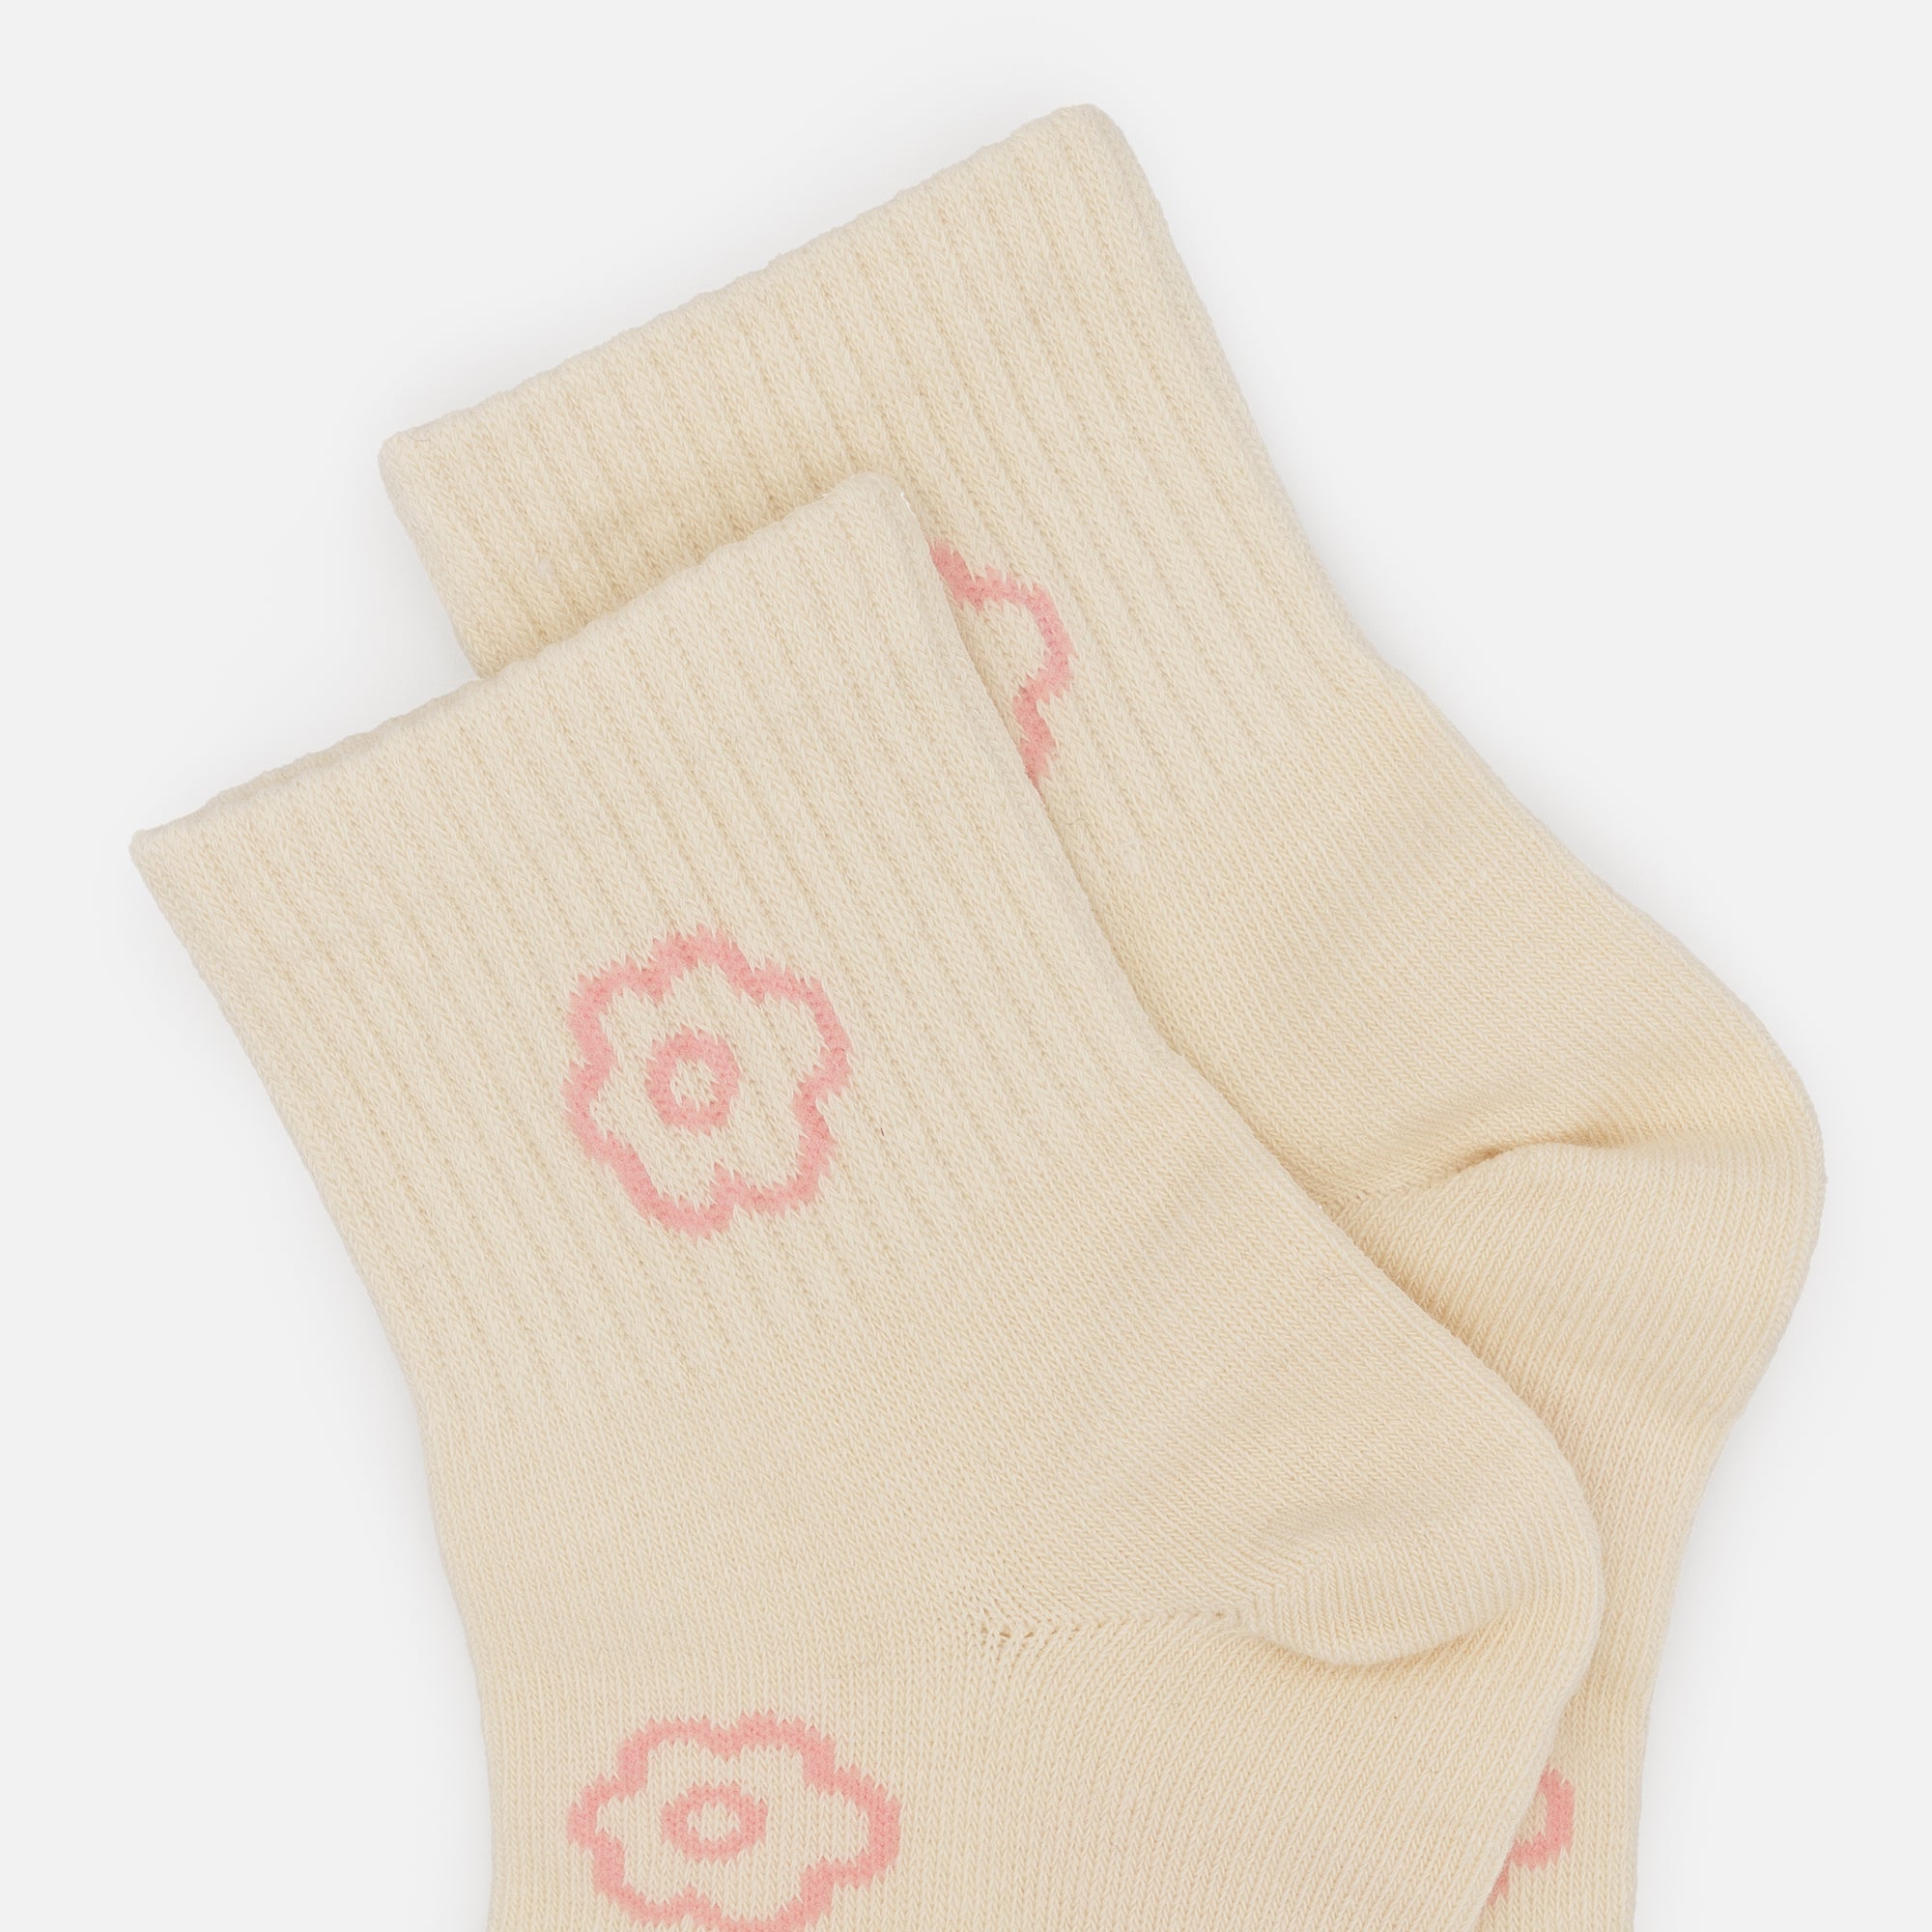 Mid-length cream stockings with pale pink empty flowers